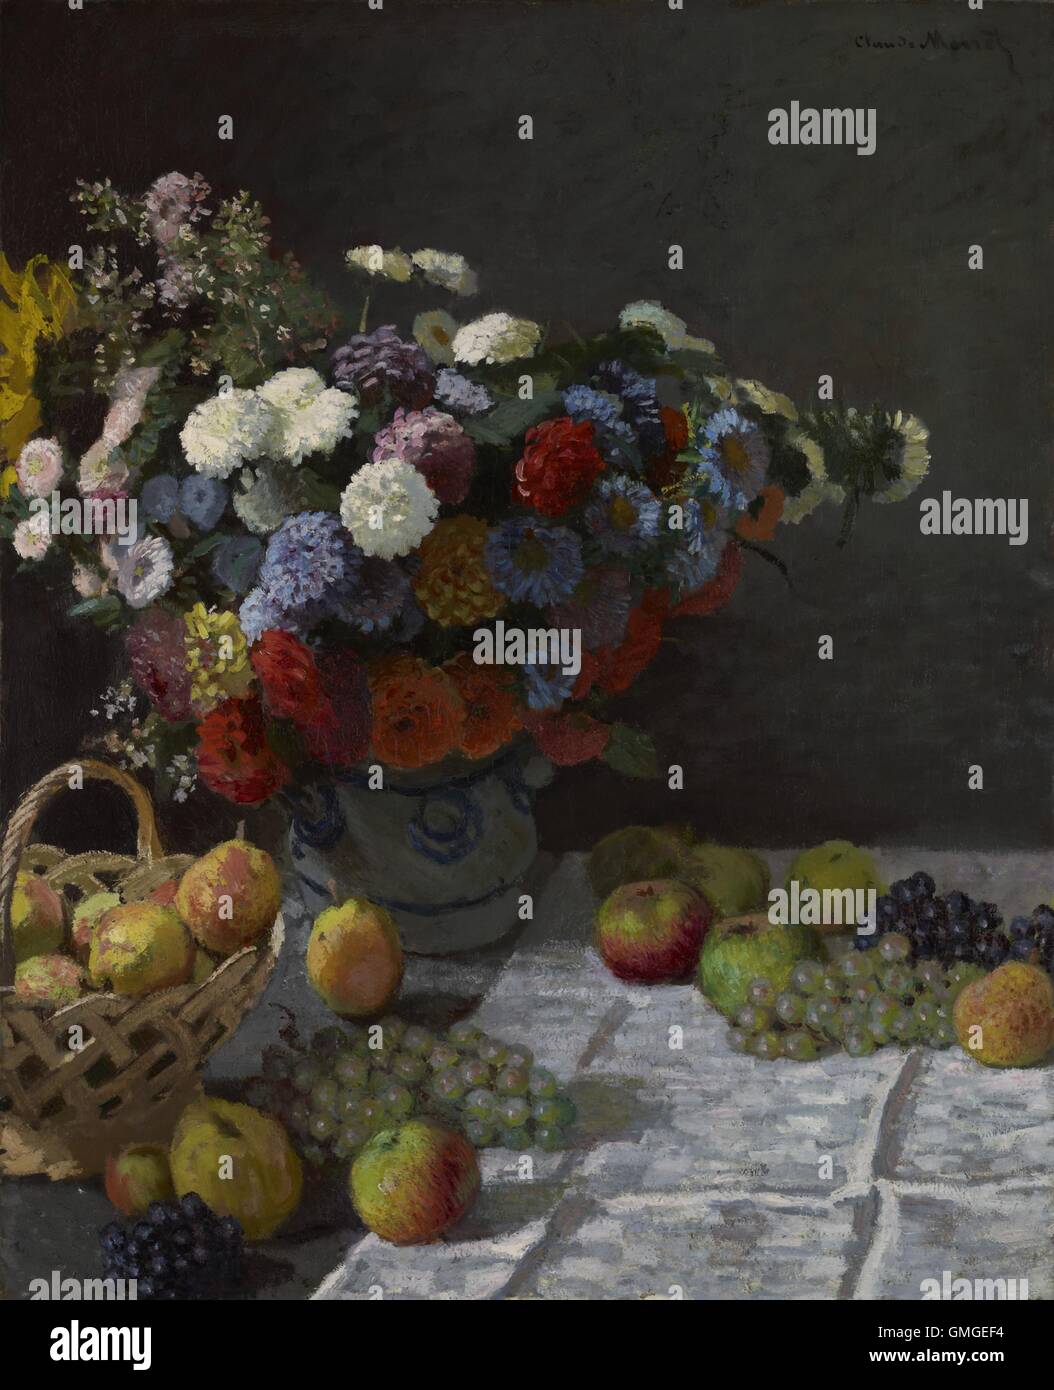 Still Life with Flowers and Fruit, by Claude Monet, 1869, French impressionist painting, oil on canvas. Monet painted this still life in the summer and fall of 1869, while he was living at Bougival on the Seine River (BSLOC 2016 6 14) Stock Photo